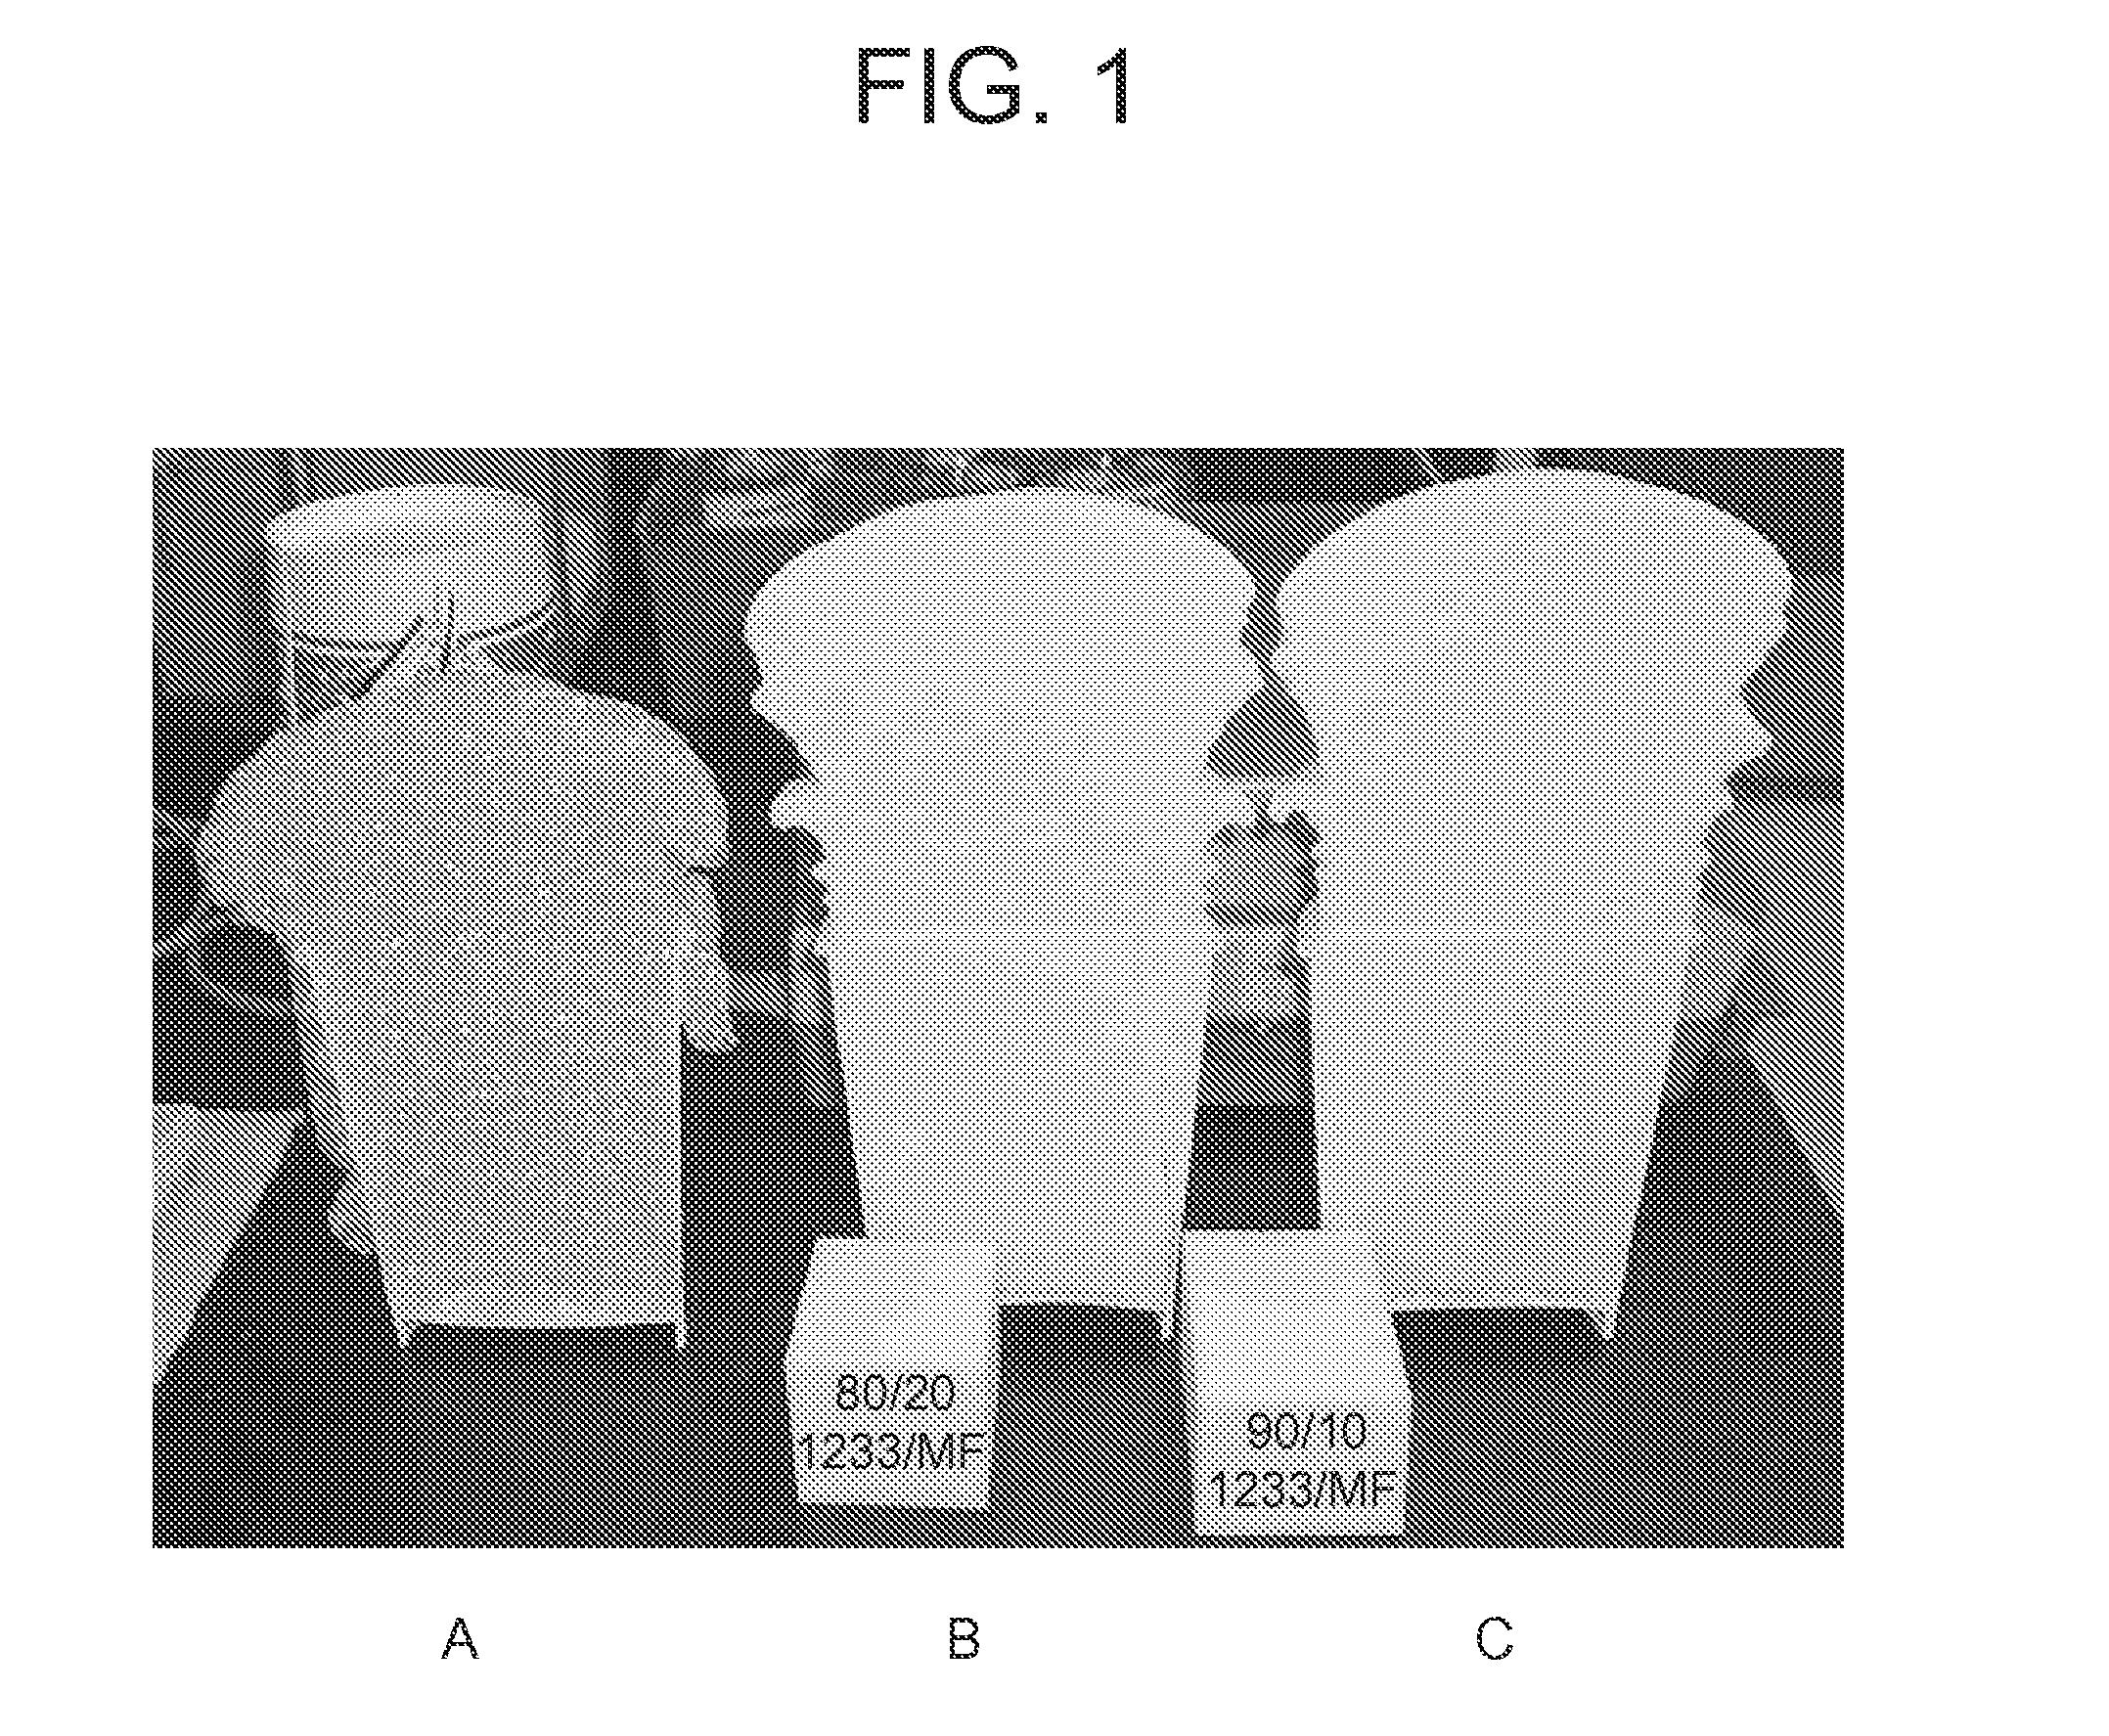 Method of improving stability of polyurethane polyol blends containing halogenated olefin blowing agent